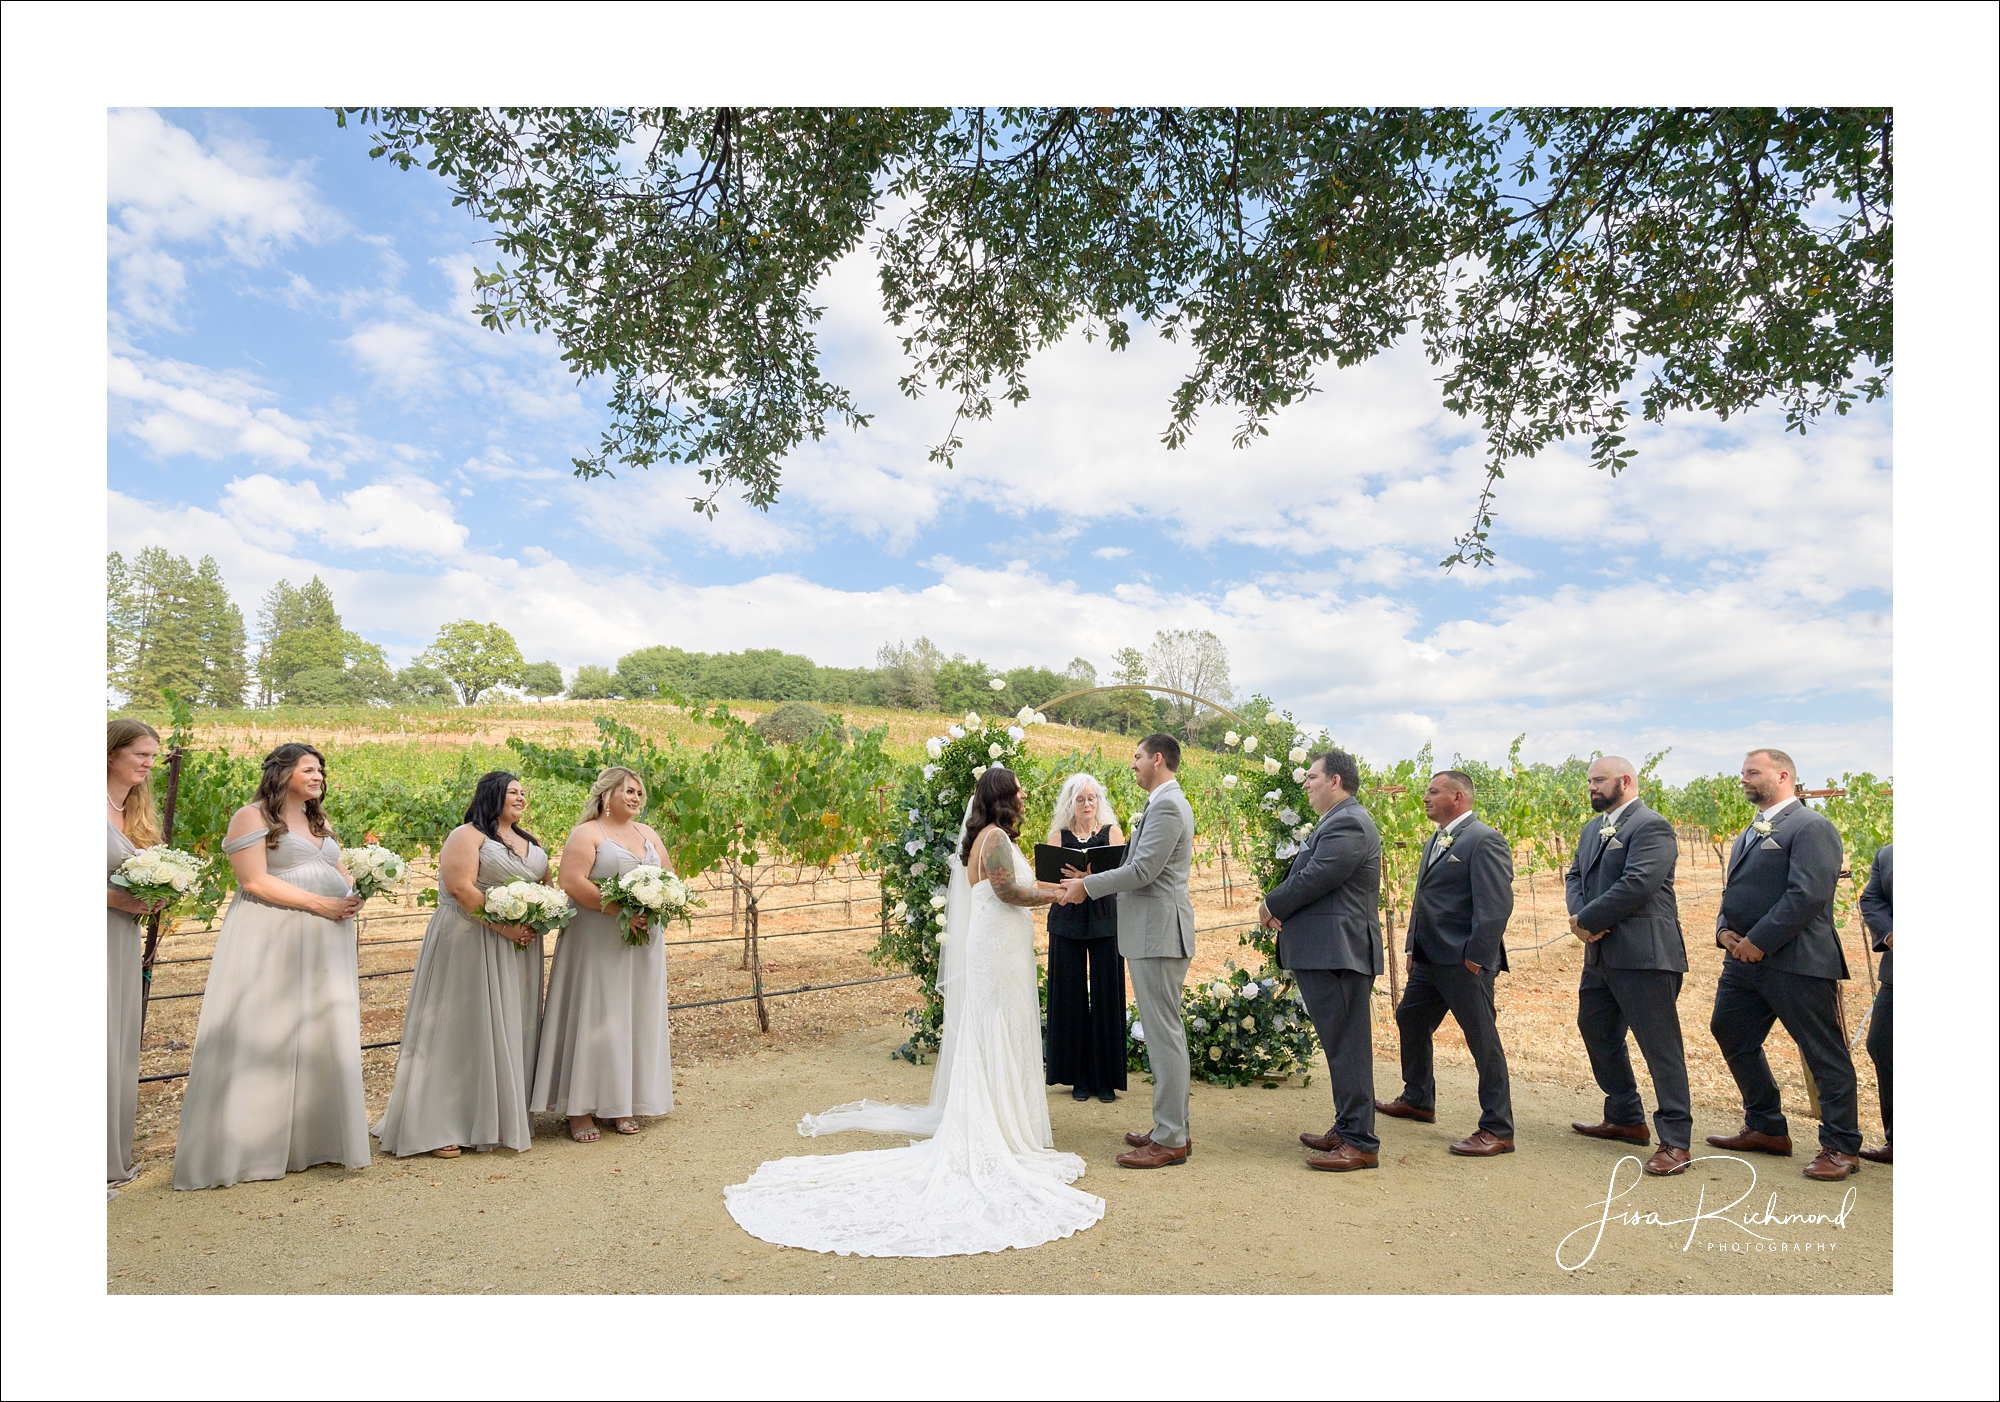 Jessica and Cory celebrate their wedding day at Black Oak Mountain Vineyards